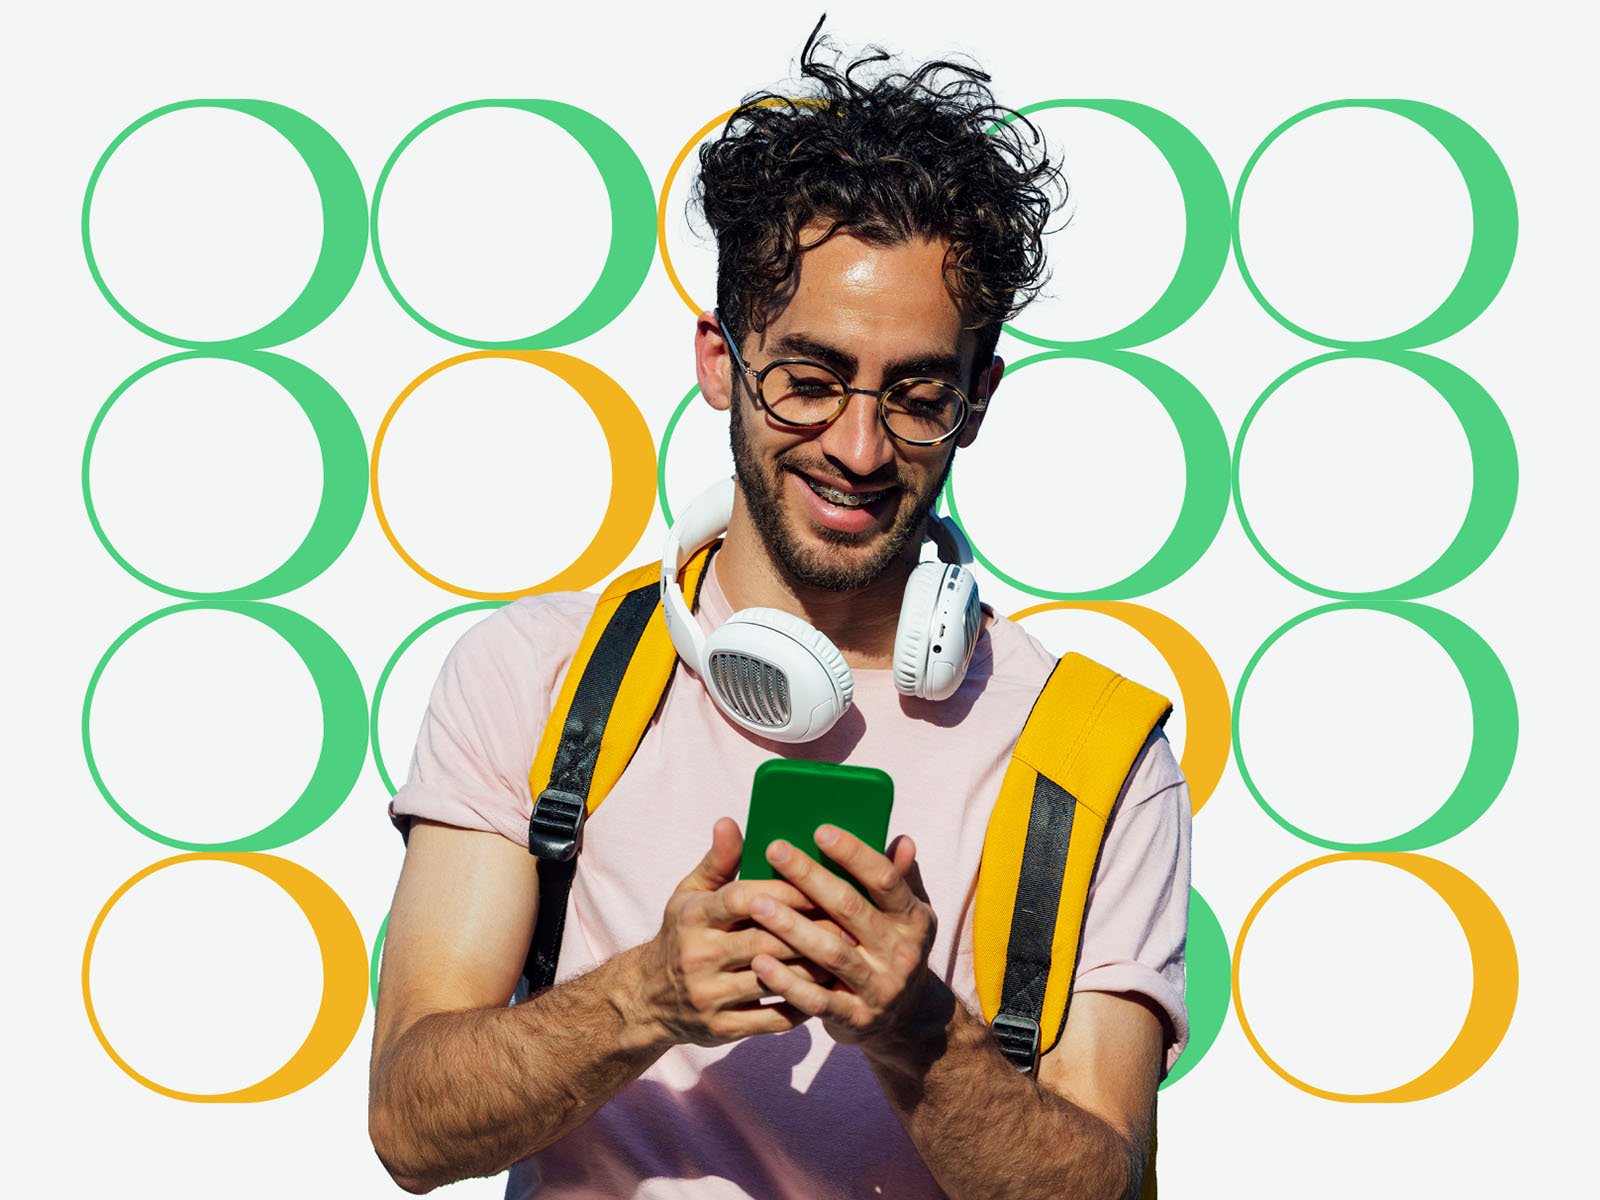 Doyuni mobile app identity image featuring a man using the app